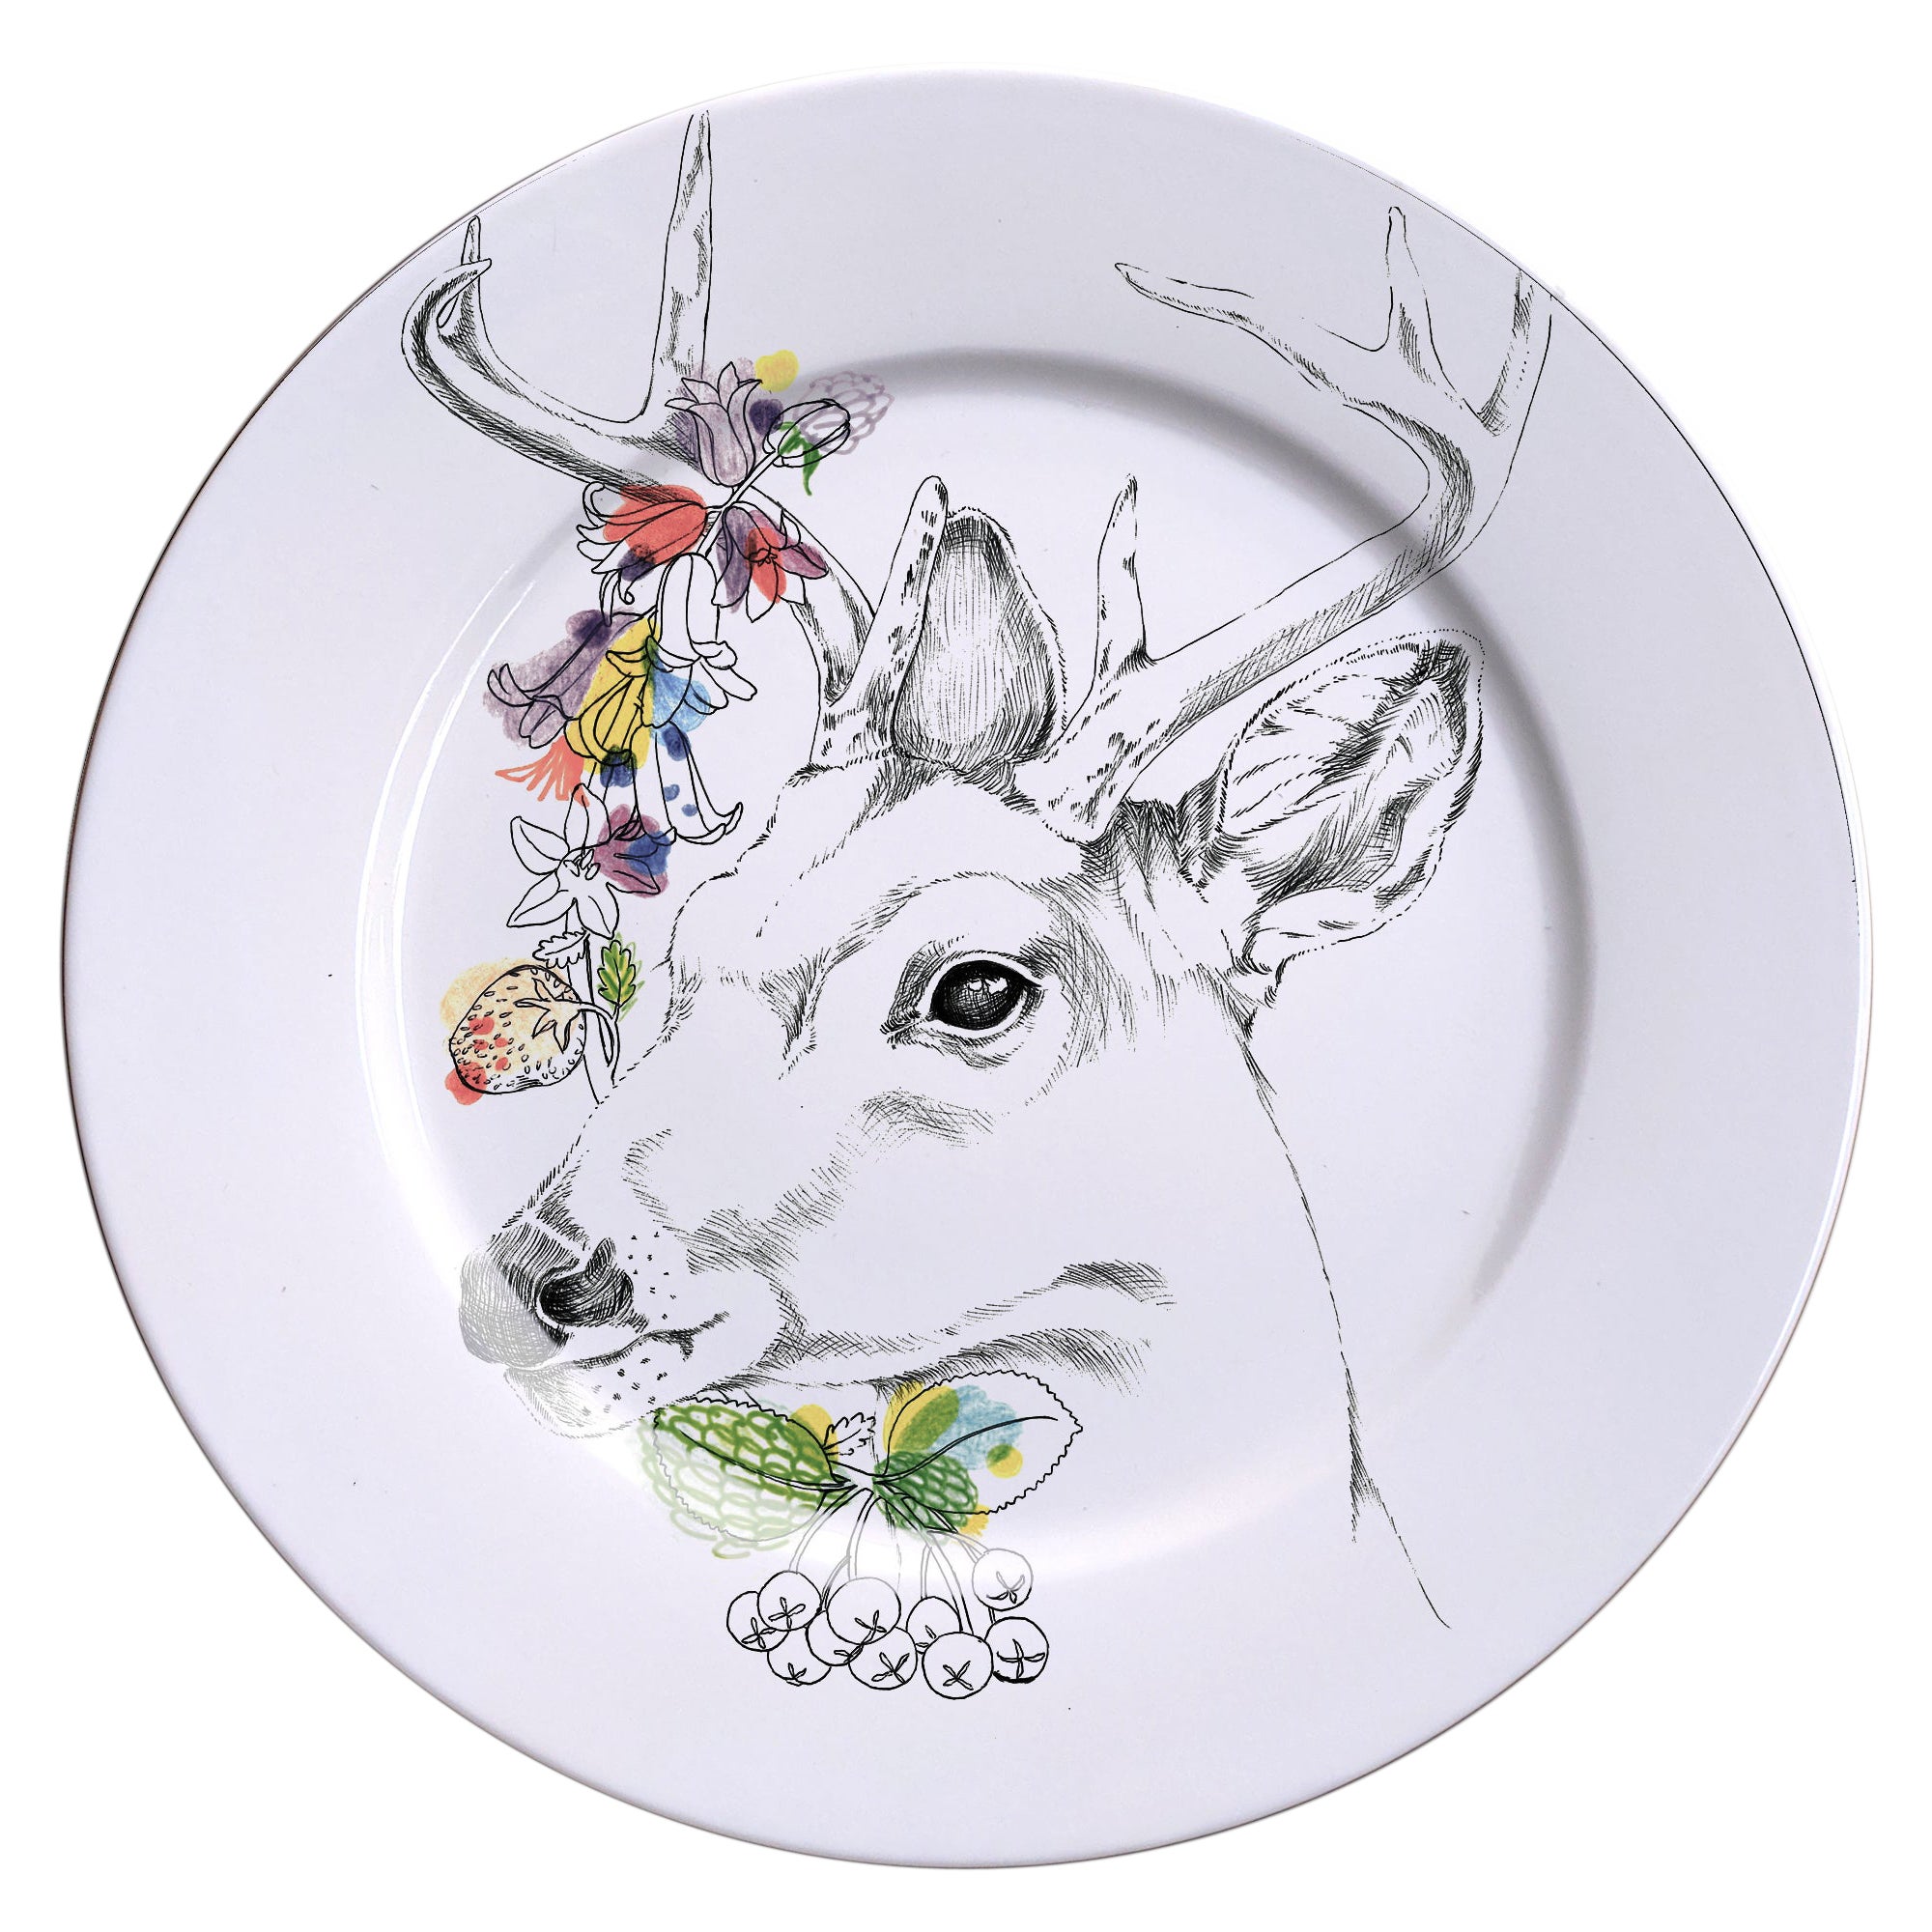 Ode to the Woods, Contemporary Porcelain Dinner Plate with Deer and Flowers For Sale